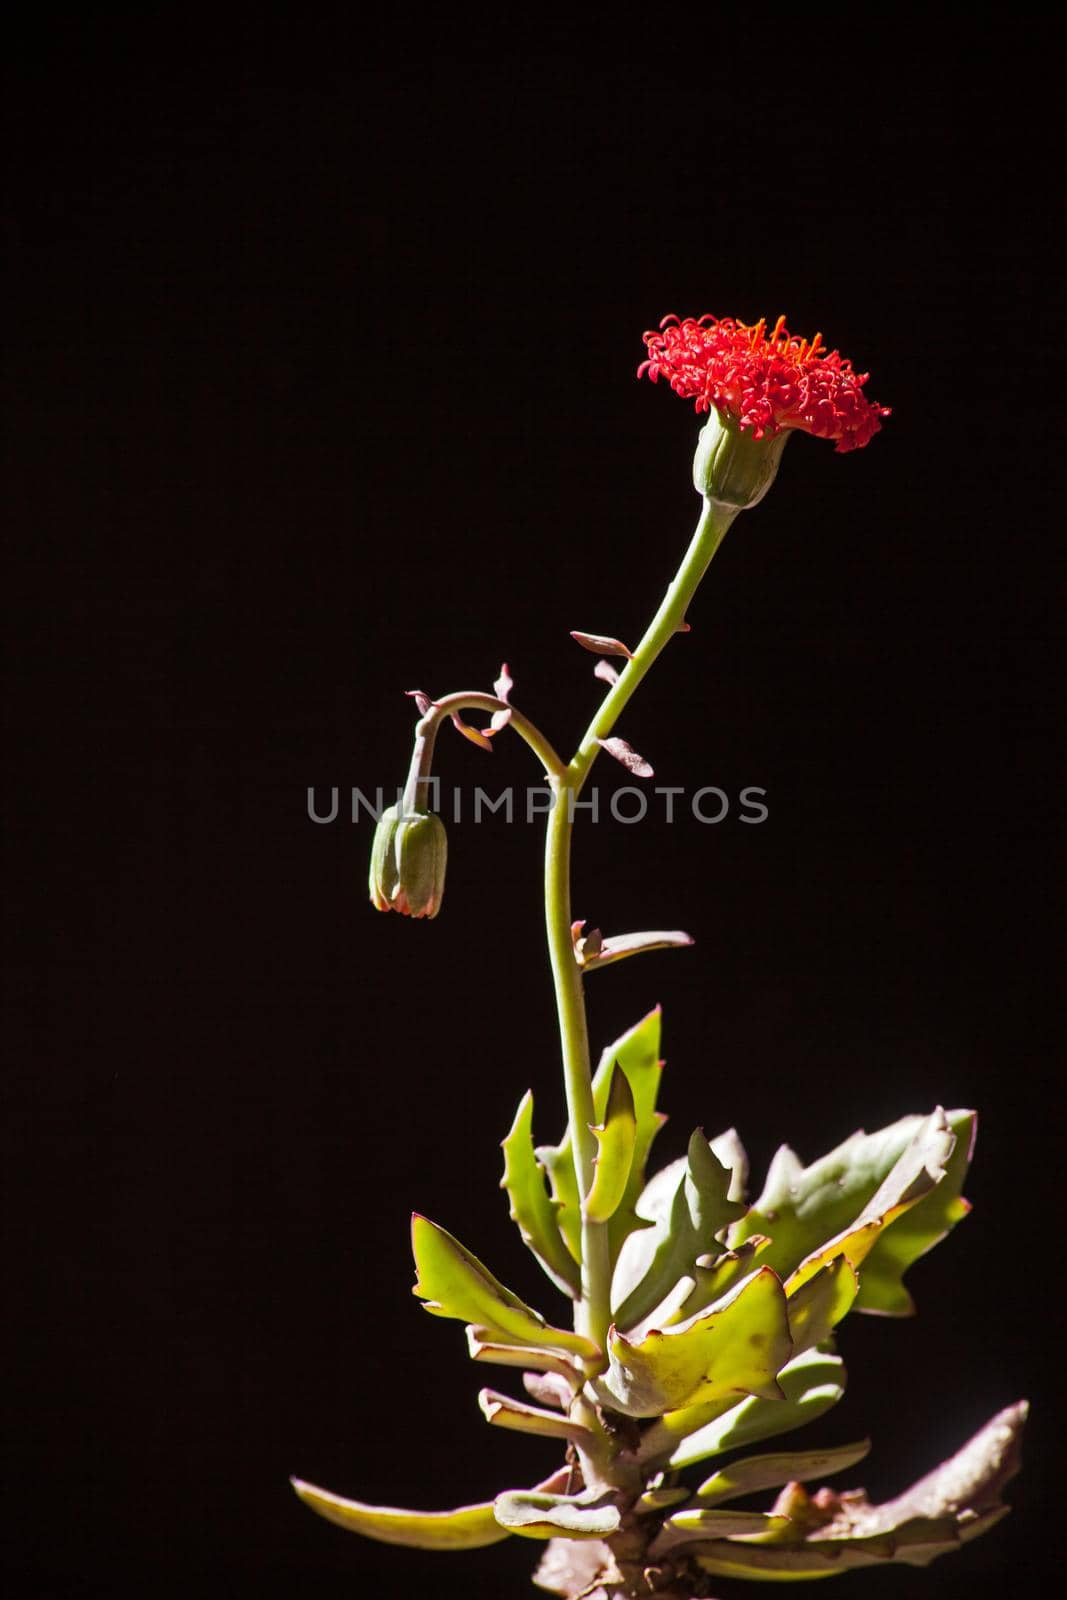 Close-up image showing the flower, bud and leaves of Senecio fulgens